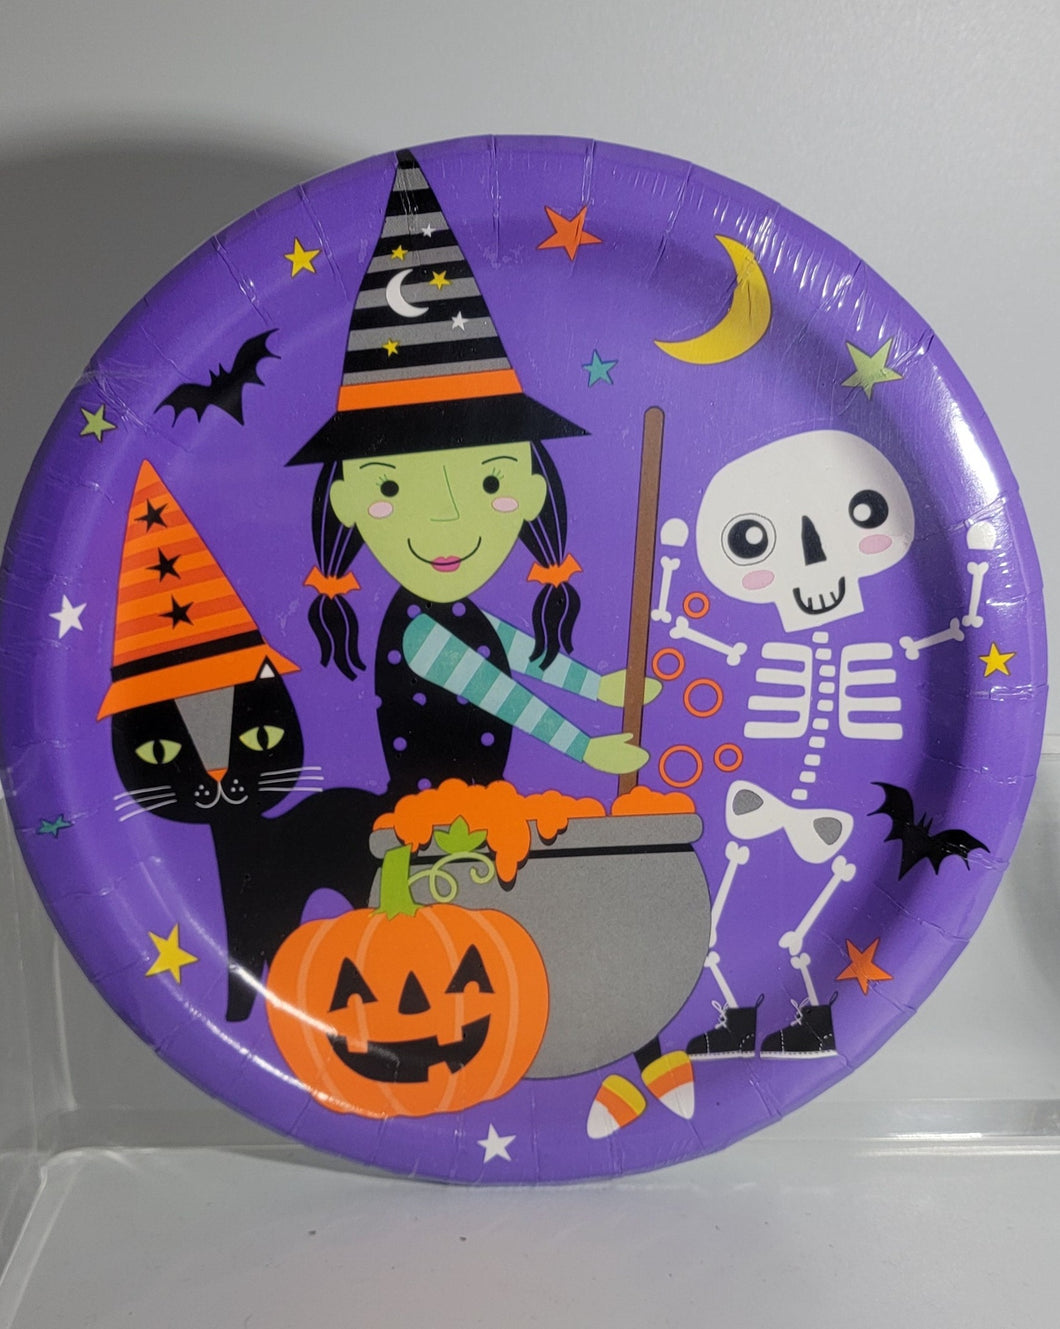 Halloween 8.6 inch Purple Party Plates, 8-pack with Witch, Skeleton, Cat, and Pumpkin